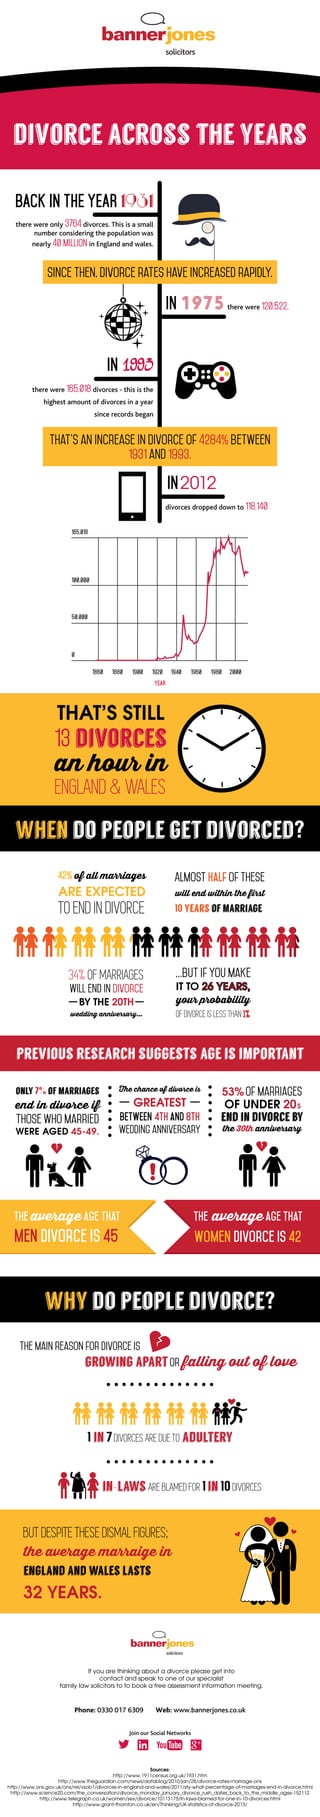 divorce across the years
Join our Social Networks
Phone: 0330 017 6309 Web: www.bannerjones.co.uk
If you are thinking about a divorce please get into
contact and speak to one of our specialist
family law solicitors to to book a free assessment information meeting.
Sources:
http://www.1911census.org.uk/1931.htm
http://www.theguardian.com/news/datablog/2010/jan/28/divorce-rates-marriage-ons
http://www.ons.gov.uk/ons/rel/vsob1/divorces-in-england-and-wales/2011/sty-what-percentage-of-marriages-end-in-divorce.html
http://www.science20.com/the_conversation/divorce_monday_january_divorce_rush_dates_back_to_the_middle_ages-152112
http://www.telegraph.co.uk/women/sex/divorce/10113175/In-laws-blamed-for-one-in-10-divorces.html
http://www.grant-thornton.co.uk/en/Thinking/UK-statistics-of-divorce-2013/
BACK IN THE YEAR 1931
there were only 3764 divorces. This is a small
number considering the population was
nearly 40 million in England and wales.
IN 1975 there were 120,522.
in2012
divorces dropped down to 118,140
in 1993
there were 165,018 divorces - this is the
highest amount of divorces in a year
since records began
Since then, divorce rates have increased rapidly.
That’s an increase in divorce of 4284% between
1931 and 1993.
165,018
100,000
50,000
0
1860 1880 1900 1920 1940 1960 1980 2000
when do people get divorced?
why do people divorce?
34% OF MARRIAGES
will end in divorce
BY THE 20TH
wedding anniversary…
…but if you make
IT TO 26 YEARS,
your probability
OF DIVORCE IS LESS THAN 1%
previous research suggests age is important
The main reason for divorce is
growing apartor falling out of love
1 in 7DIVORCES ARE DUE TO adultery
BUT DESPITE THESE DISMAL FIGURES;
the average marraige in
england and wales lasts
32 YEARS.
YEAR
will end within the first
in-laws ARE BLAMED FOR 1in 10DIVORCES
 